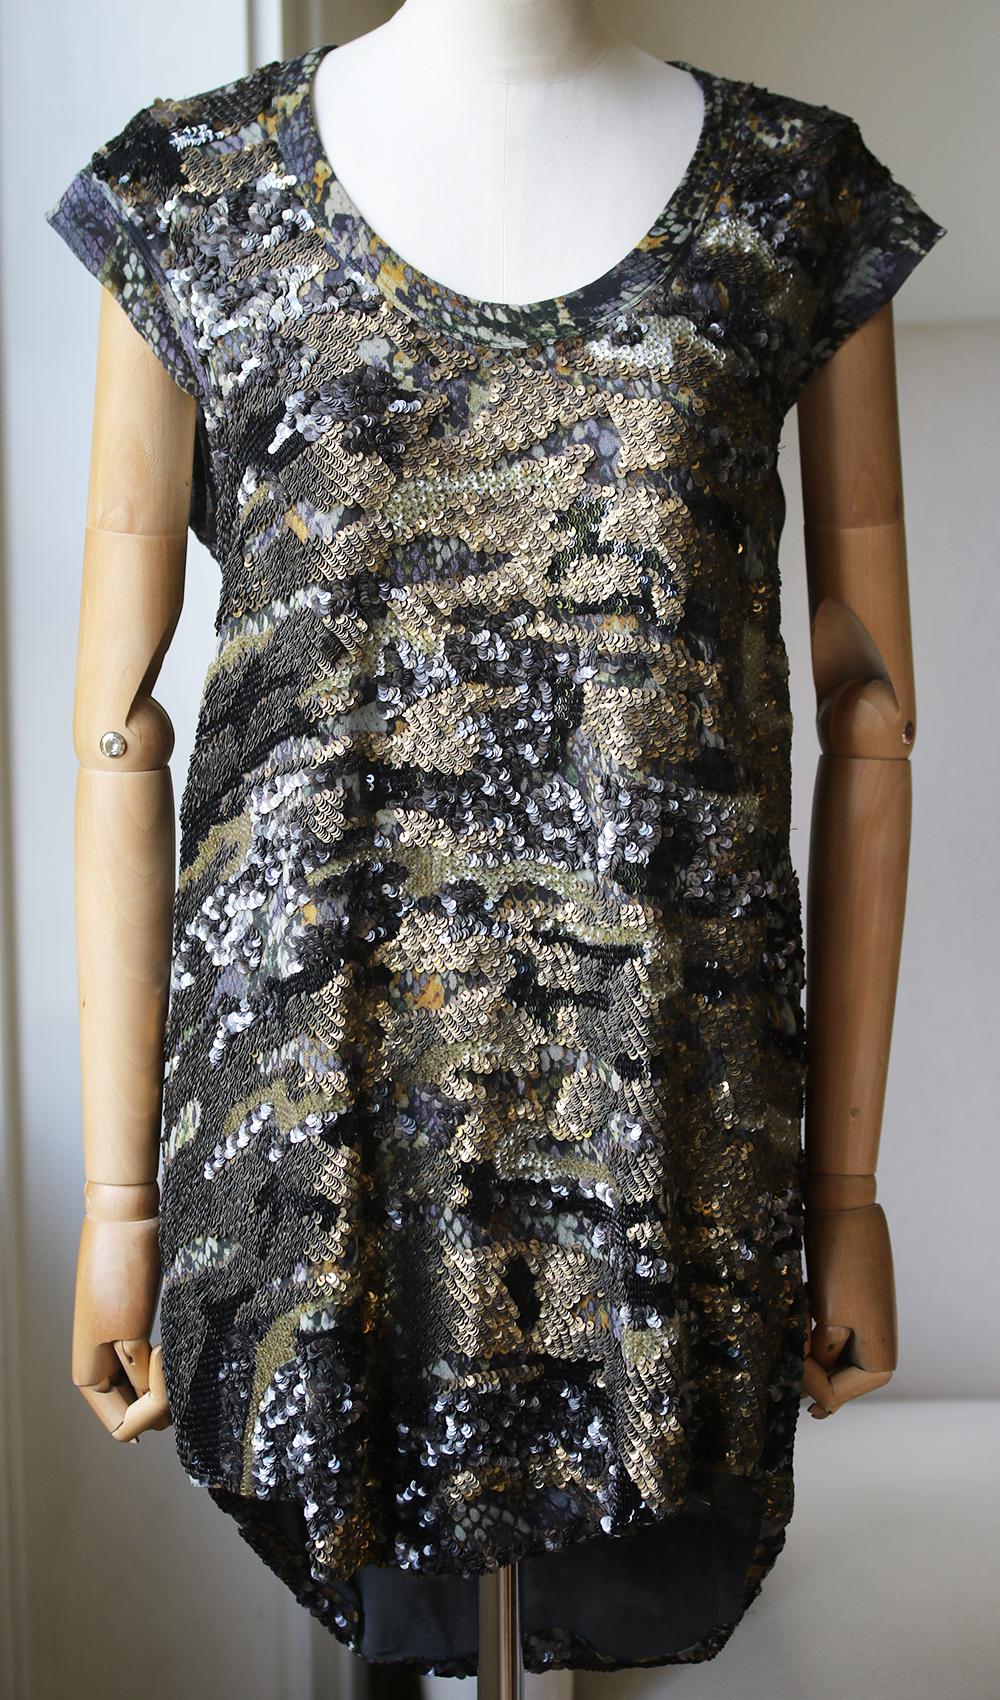 Green silk, cotton and calf leather sequin top from isabel marant featuring a u neck, short sleeves, a camouflage pattern and a loose fit. Colour: green. 100% Silk. 

Size: FR 36 (UK 8, US 4, IT 40)

Condition: As new condition, no sign of wear. 